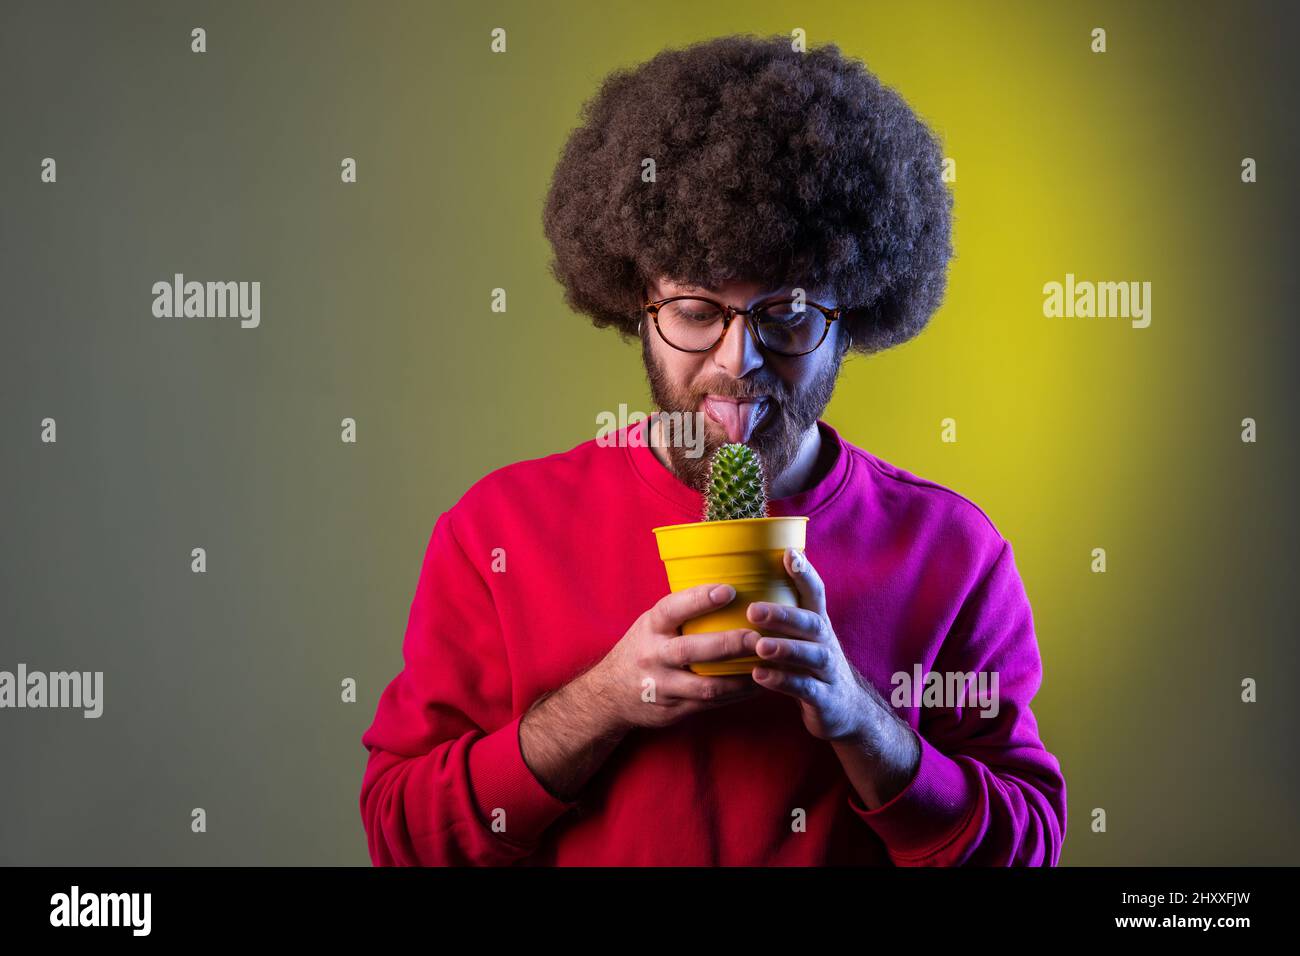 Crazy childish hipster man with Afro hairstyle holding cactus in hands, trying to lick flower with tongue, wearing red sweatshirt. Indoor studio shot isolated on colorful neon light background. Stock Photo